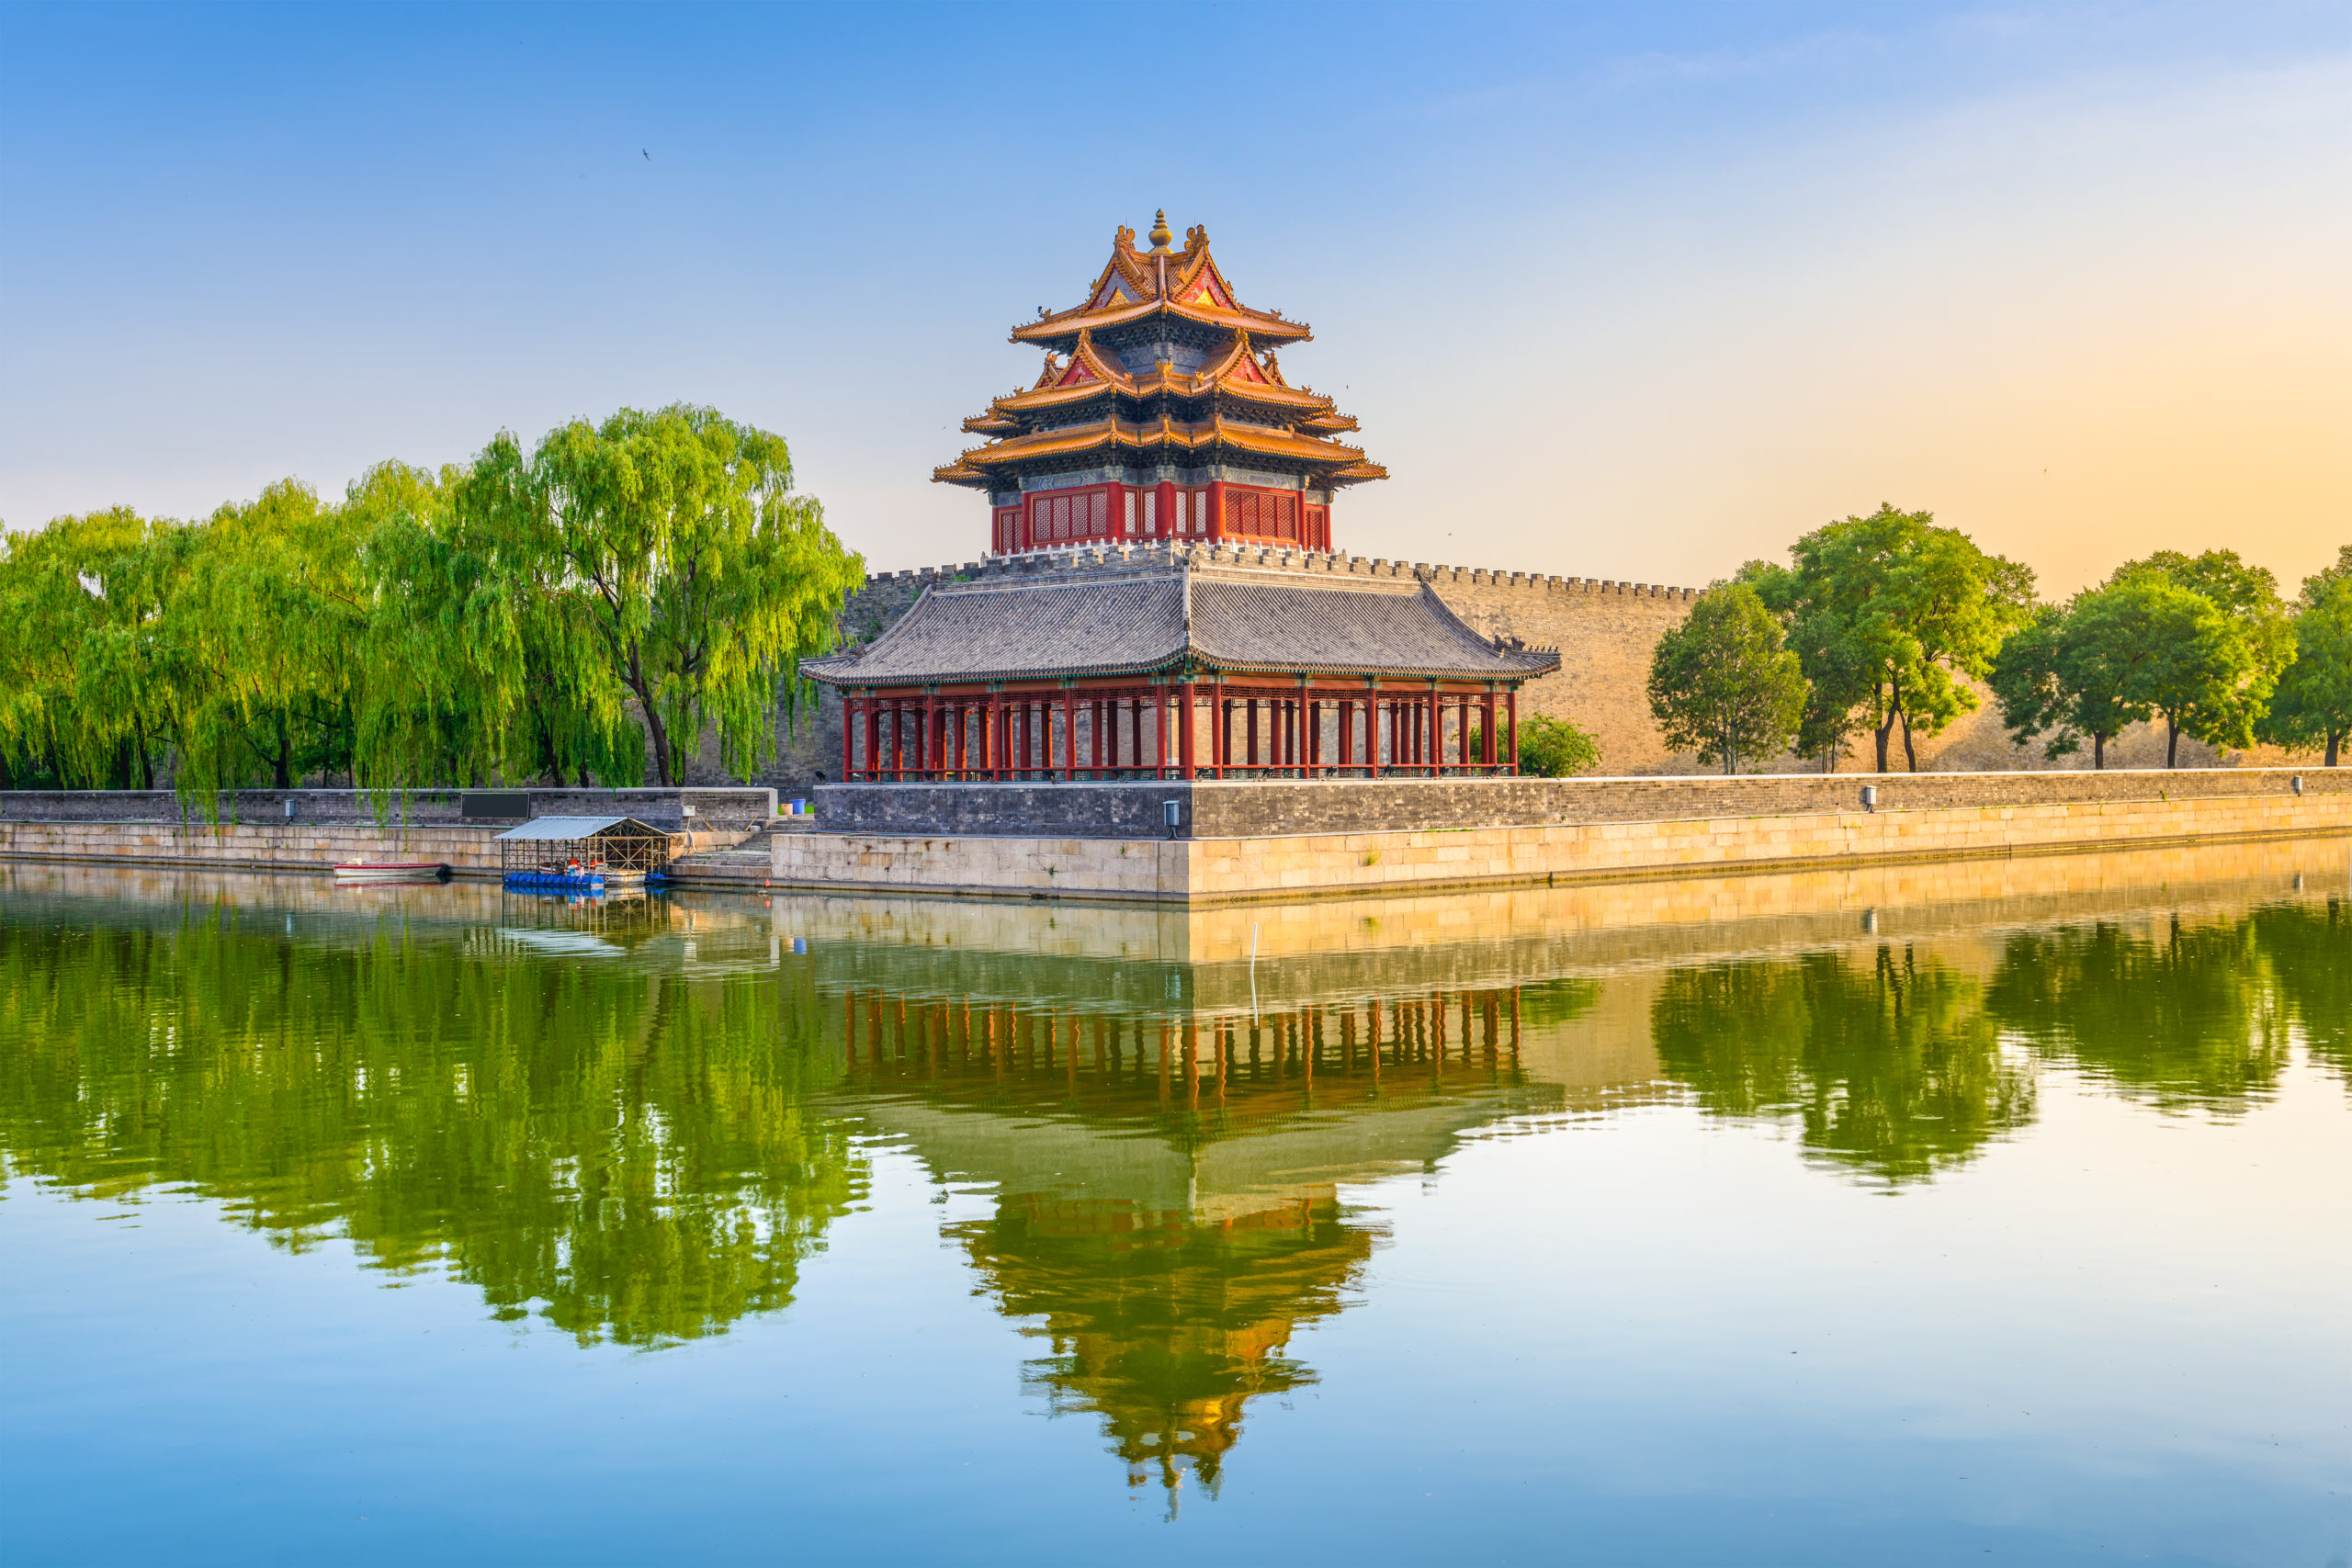 Enjoy an amazing view of Forbidden City from Jingshan Park